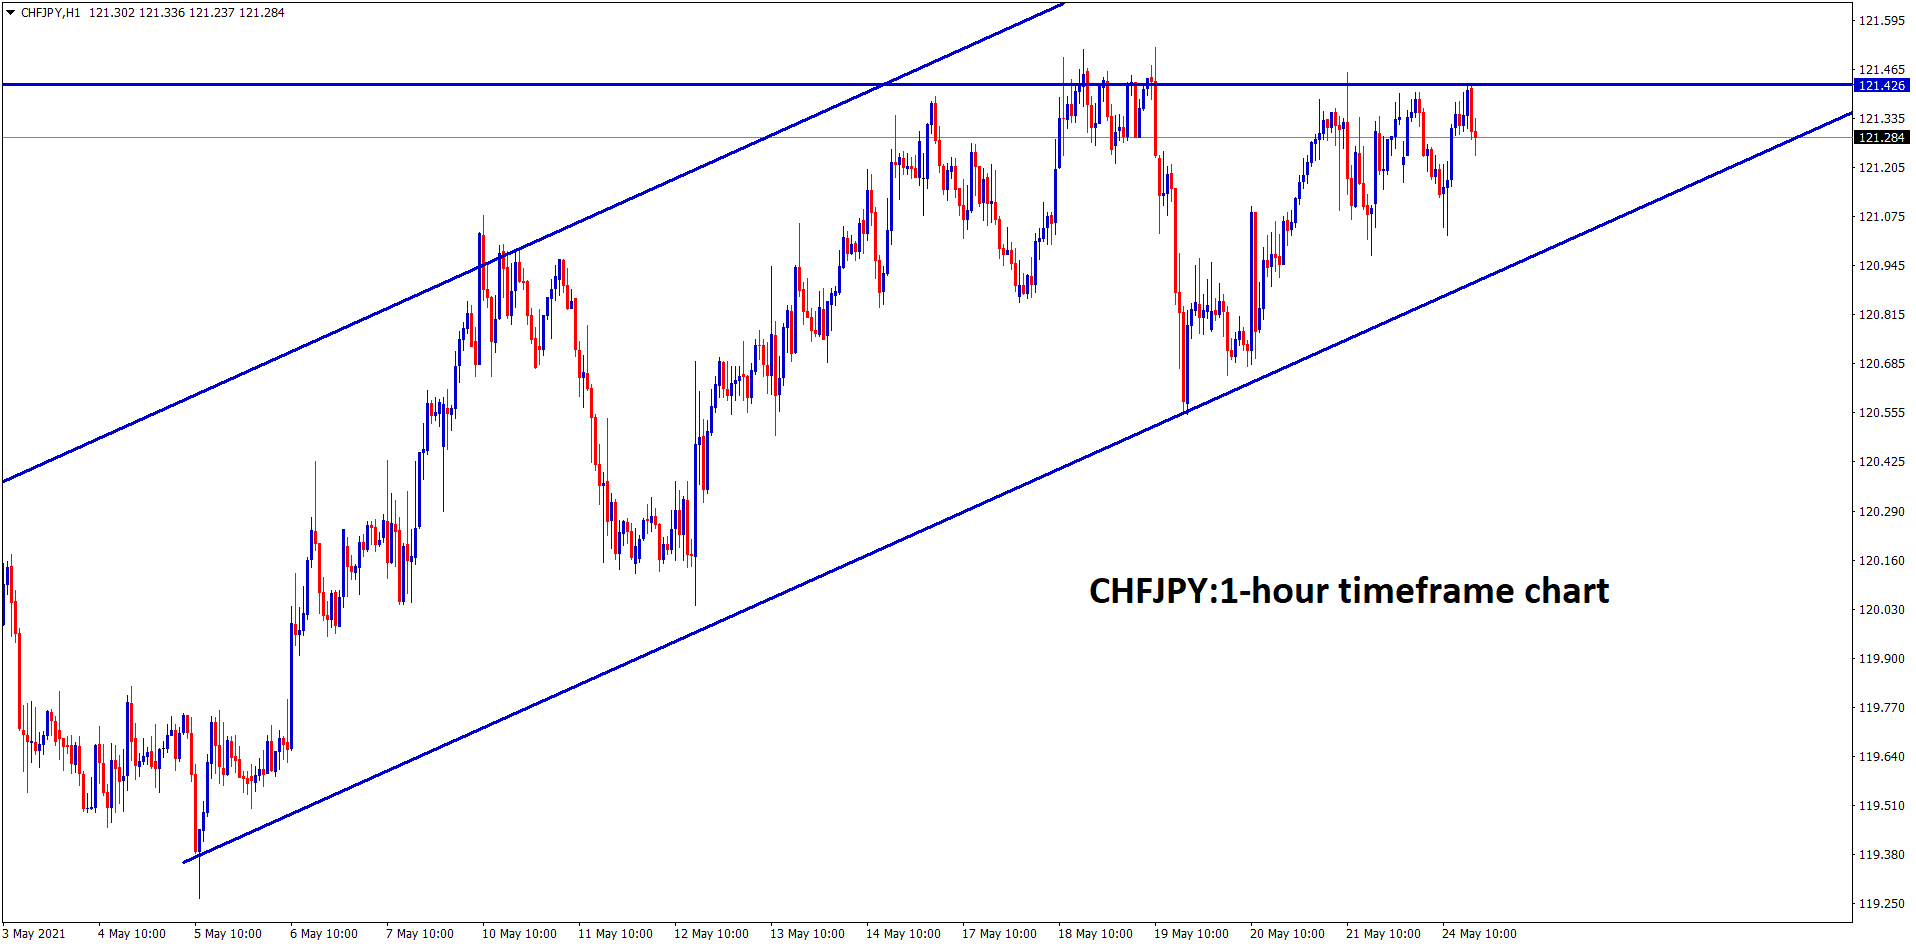 CHFJPY formed an Ascending Triangle in 1 hour timeframe